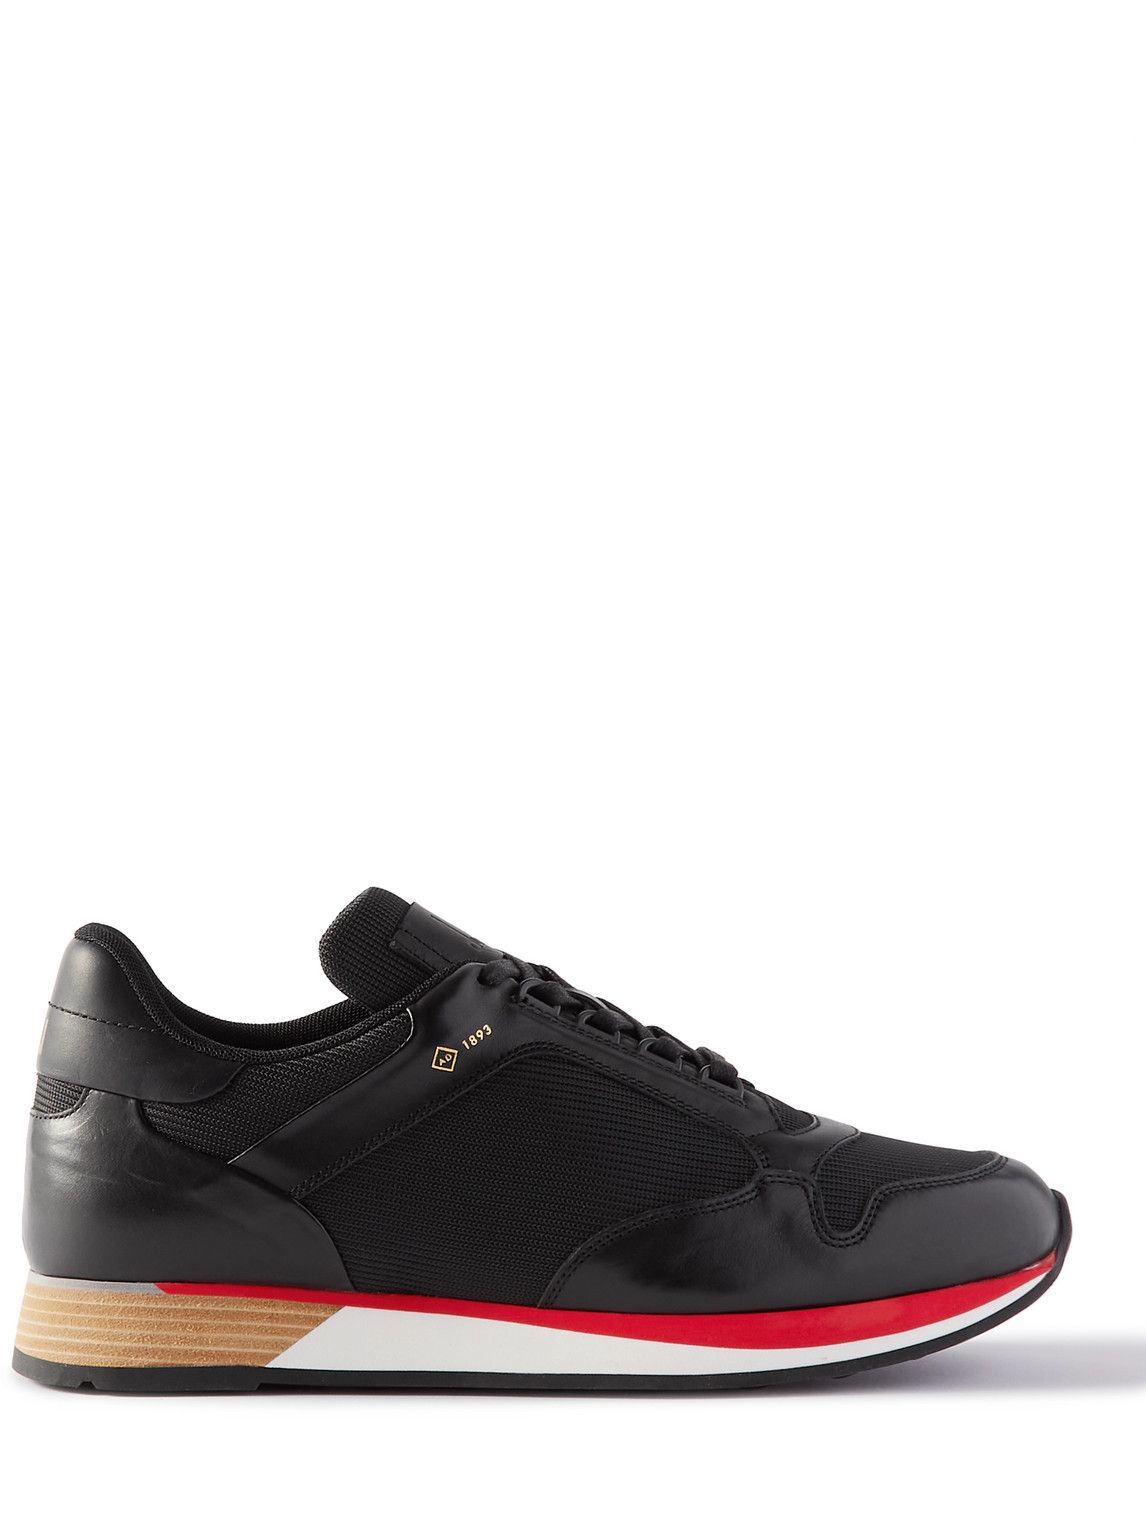 Dunhill - Duke Mesh and Leather Sneakers - Black Dunhill